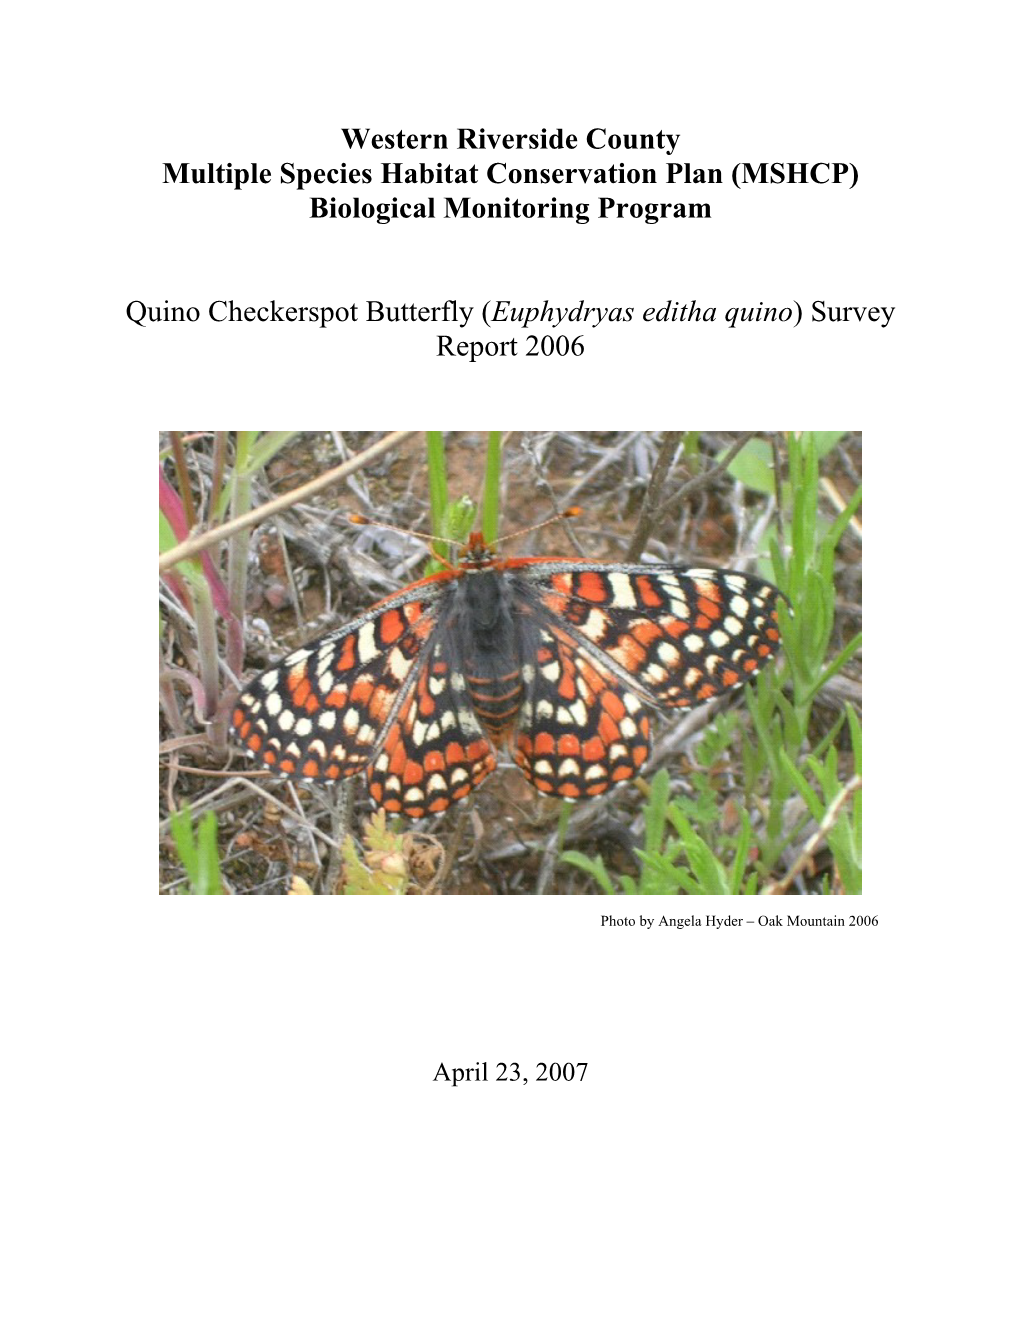 Biological Monitoring Program Quino Checkerspot Butterfly Survey Report 2006